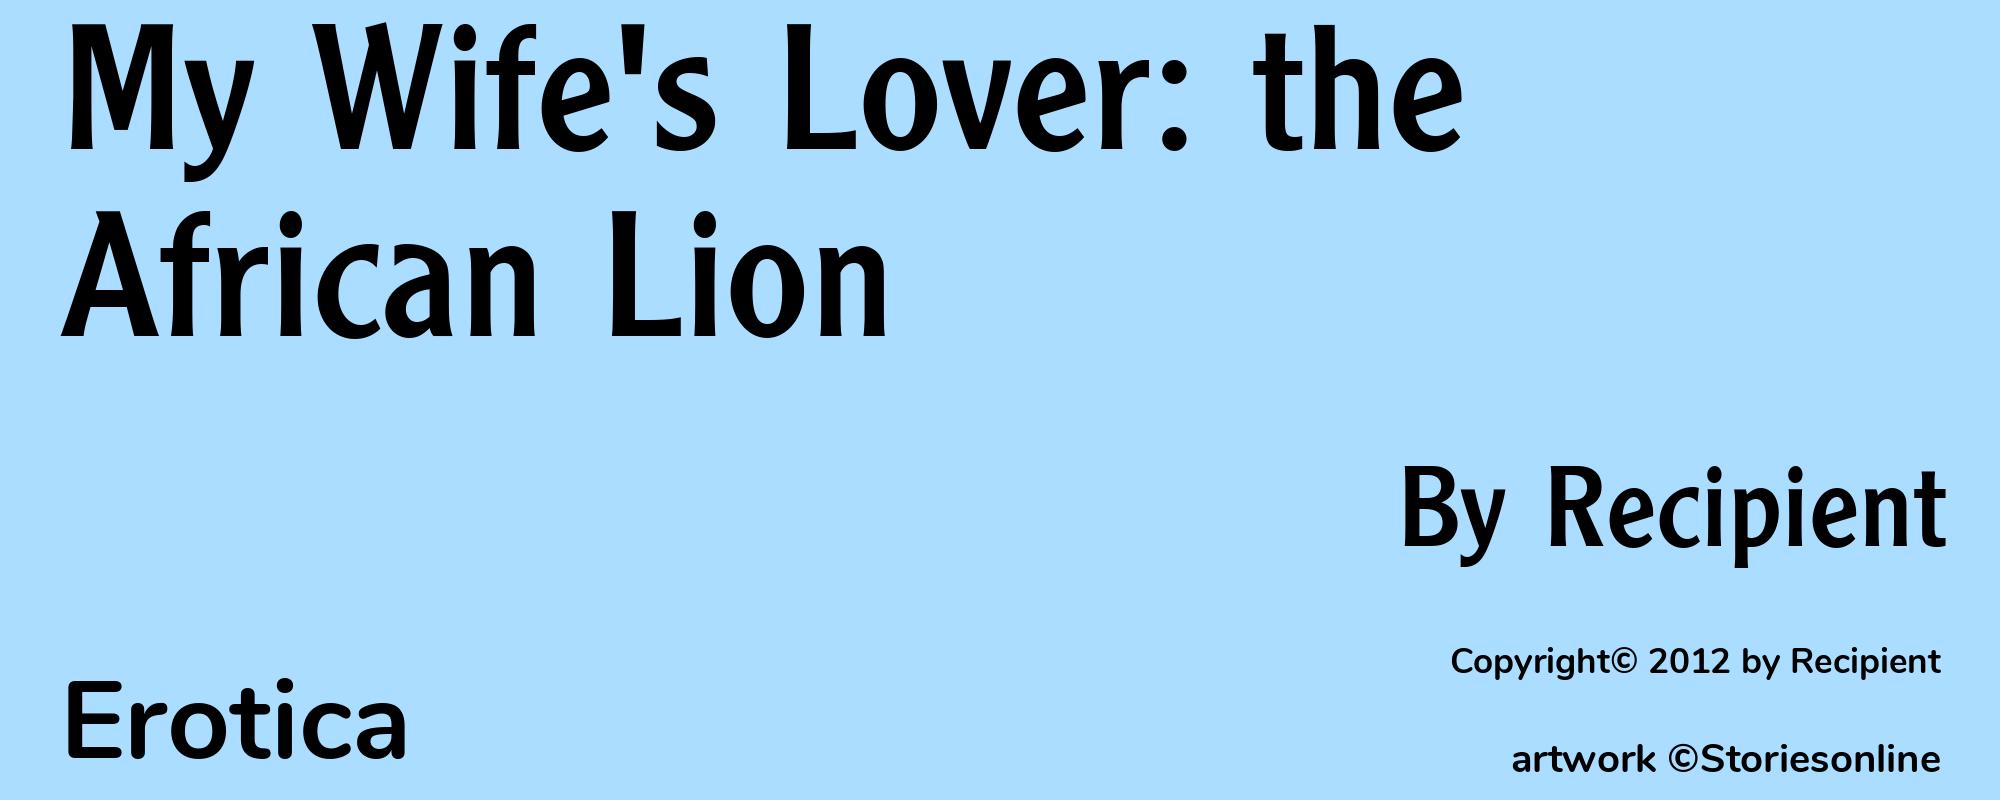 My Wife's Lover: the African Lion - Cover